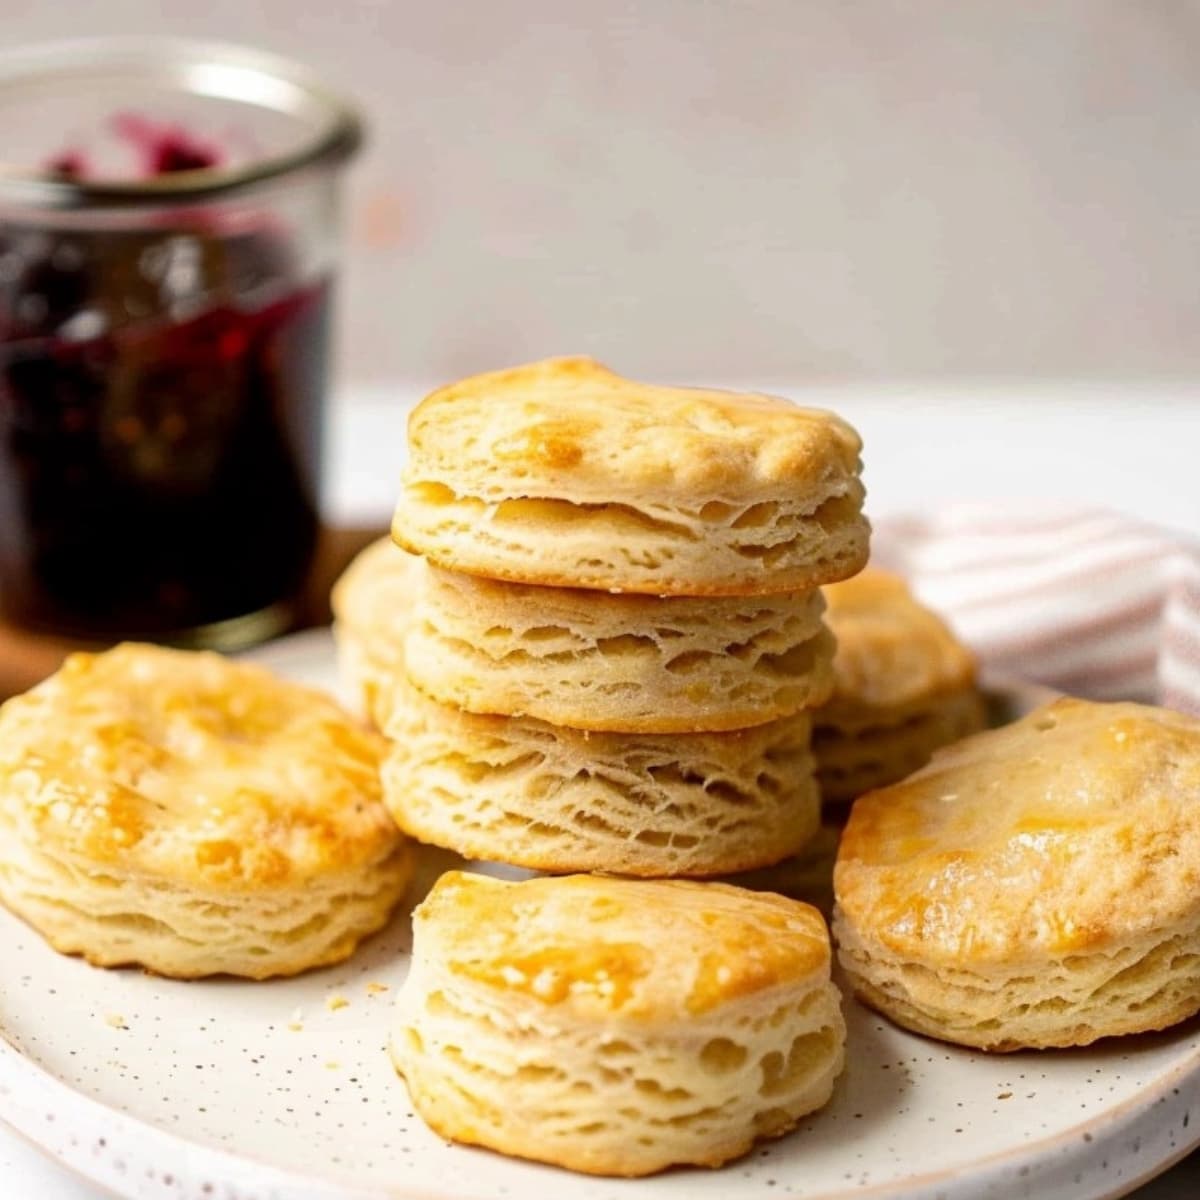 Biscuits in plate with jar of blueberry jam in the background.